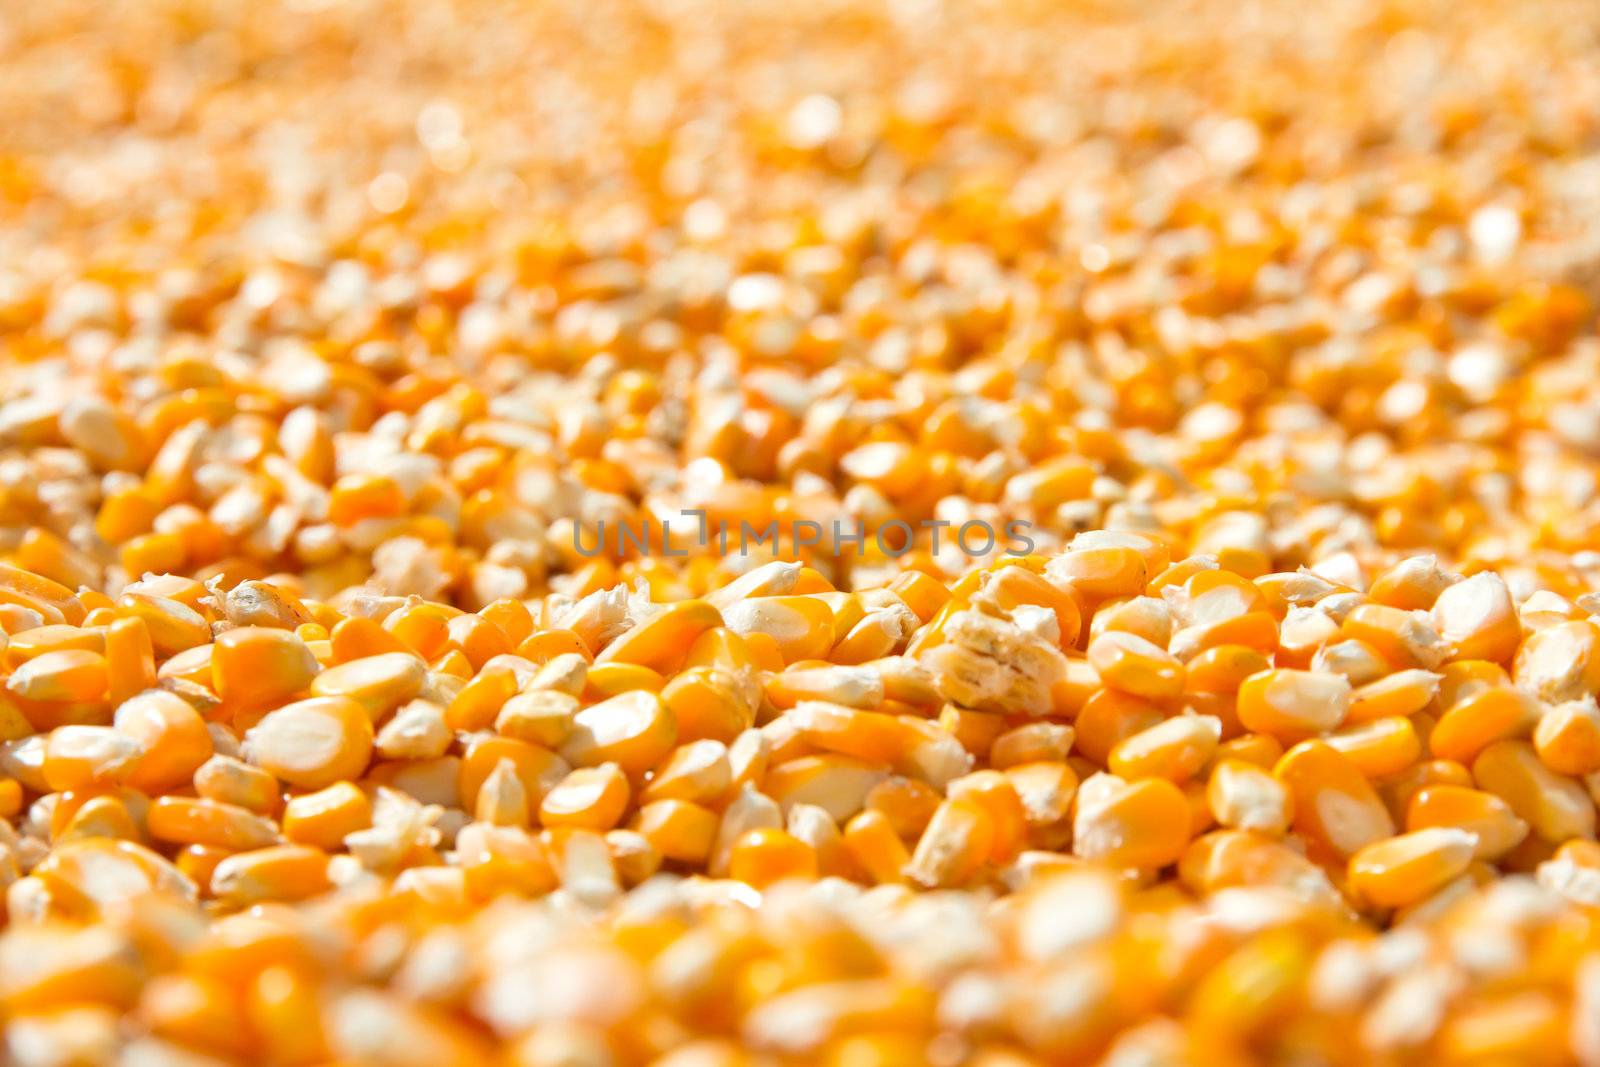 corn seed background by ponsulak